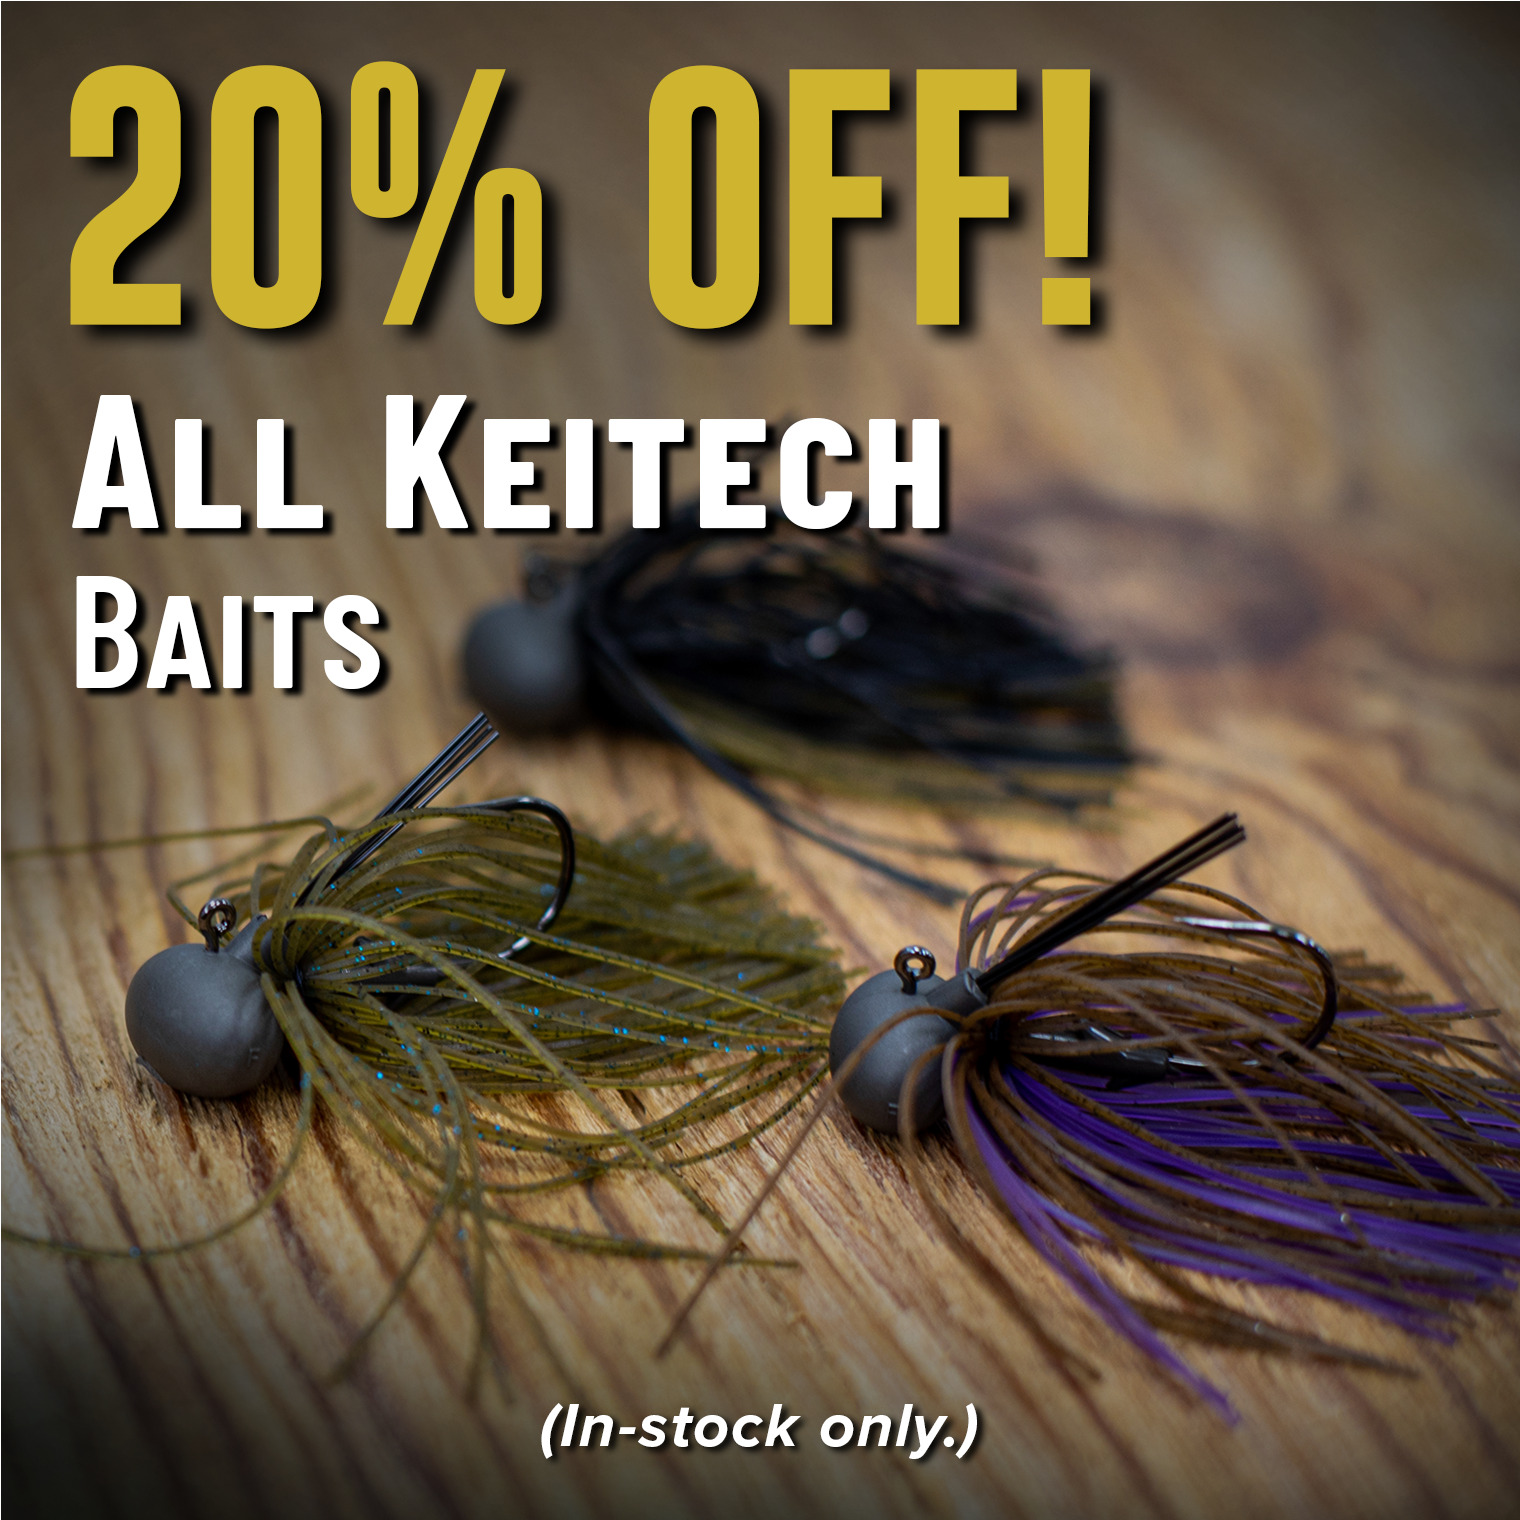 20% Off! All Keitech Baits (In-stock only.)